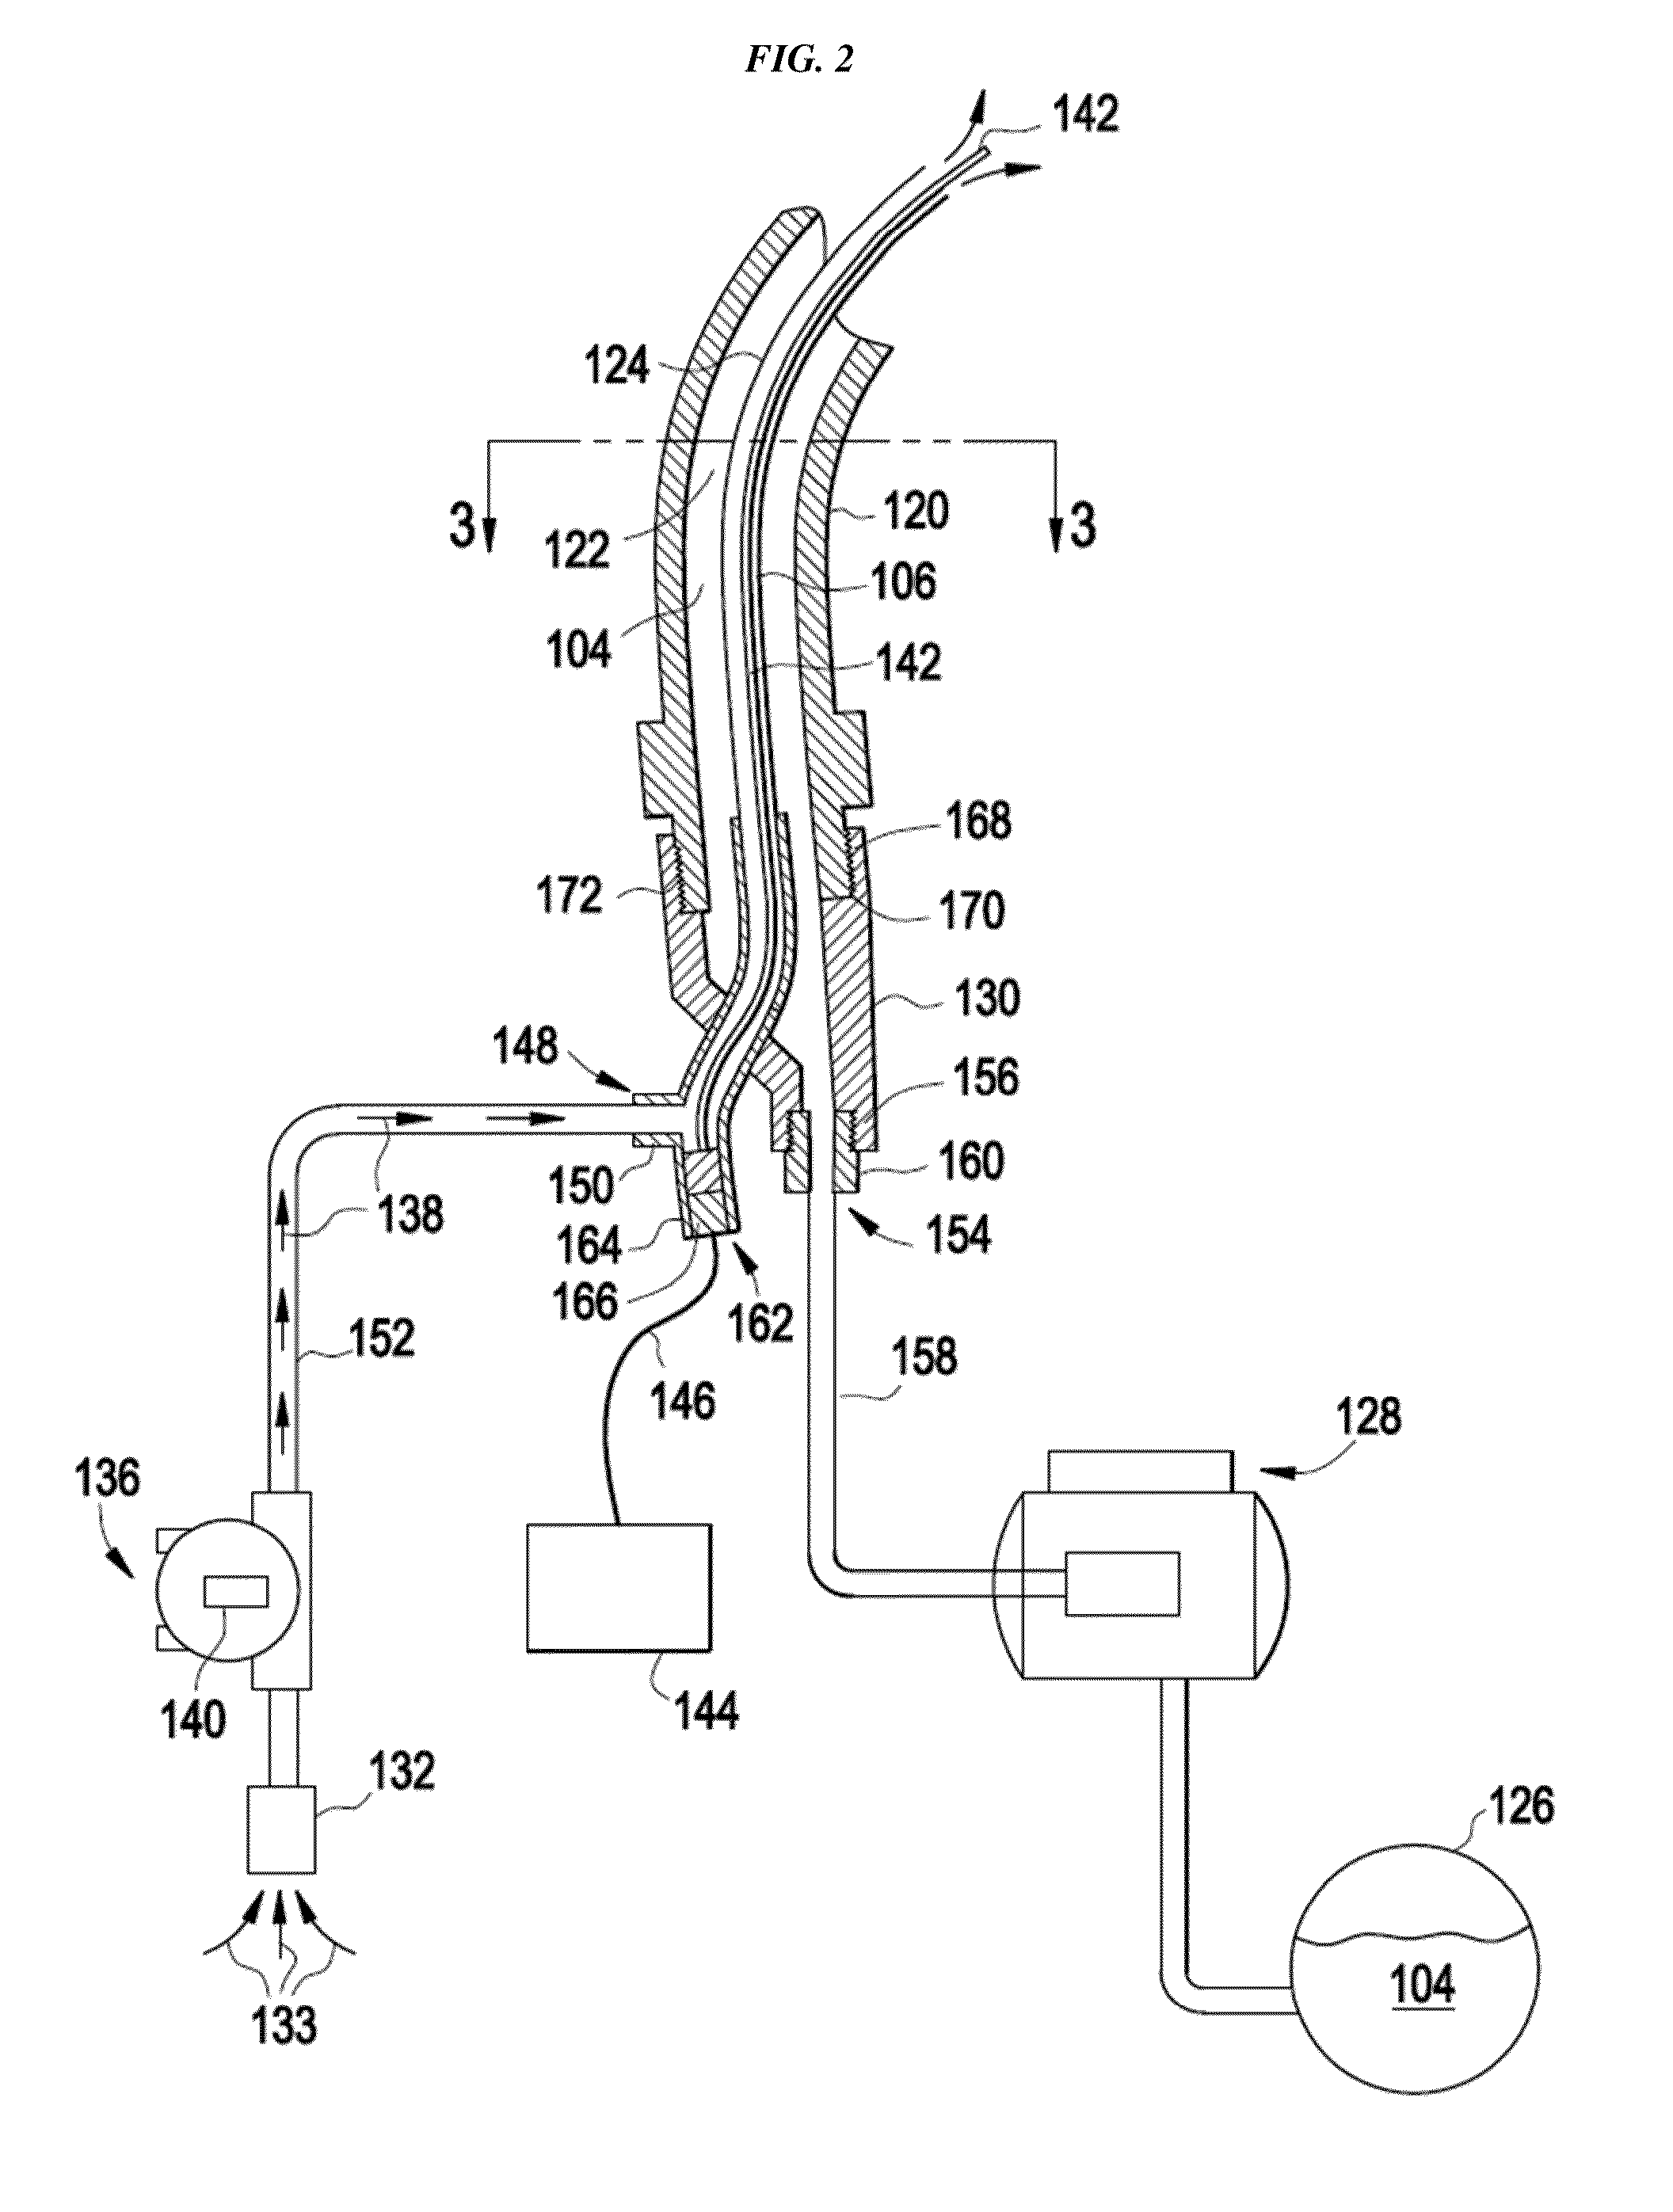 Devices and Methods for Heating Fluid Dispensers, Hoses, and Nozzles